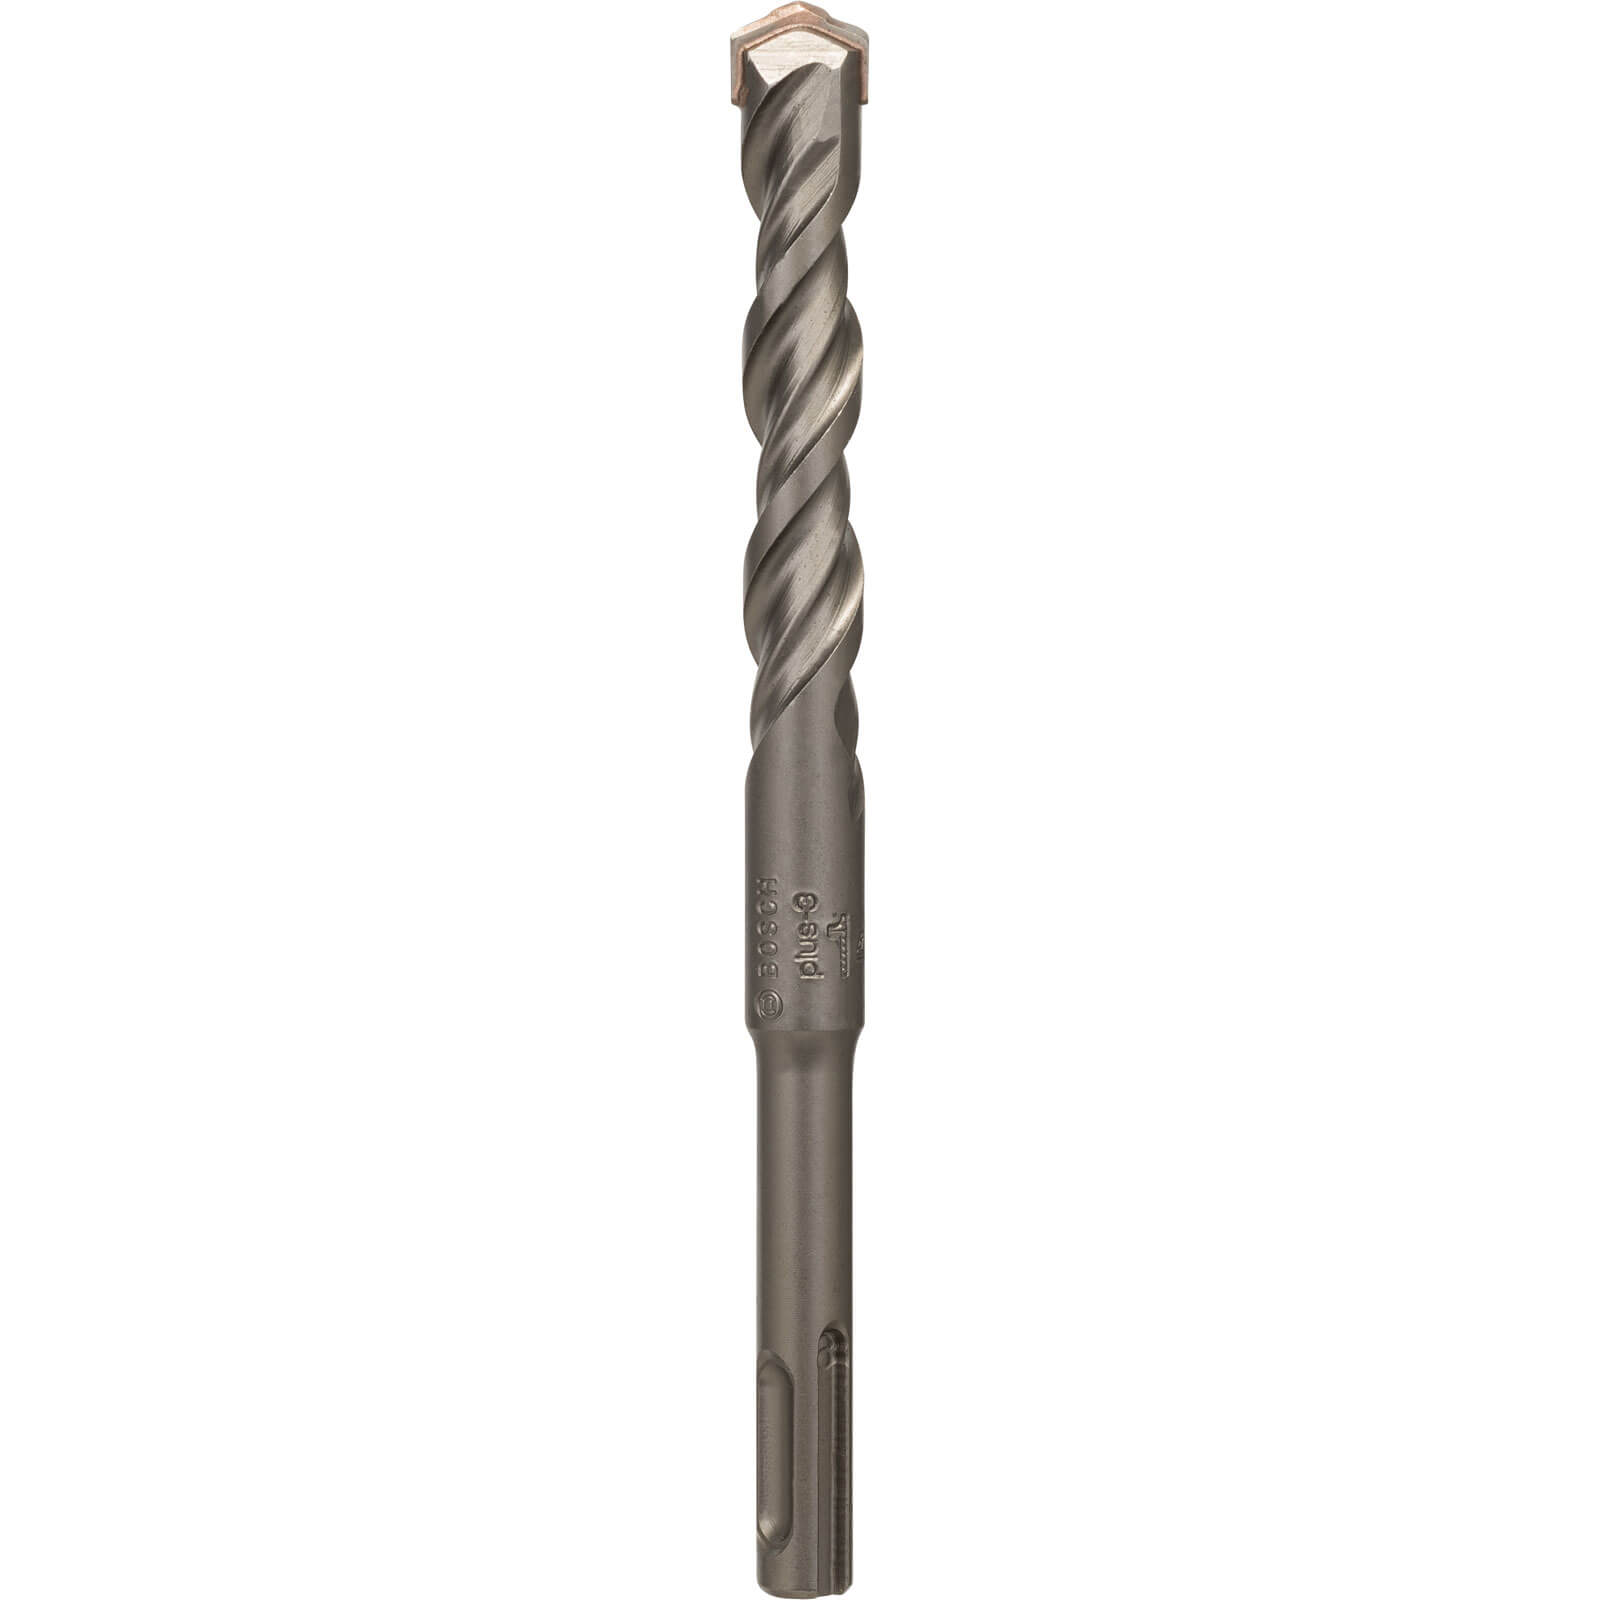 Image of Bosch Series 3 SDS Plus Masonry Drill Bit 14mm 160mm Pack of 10